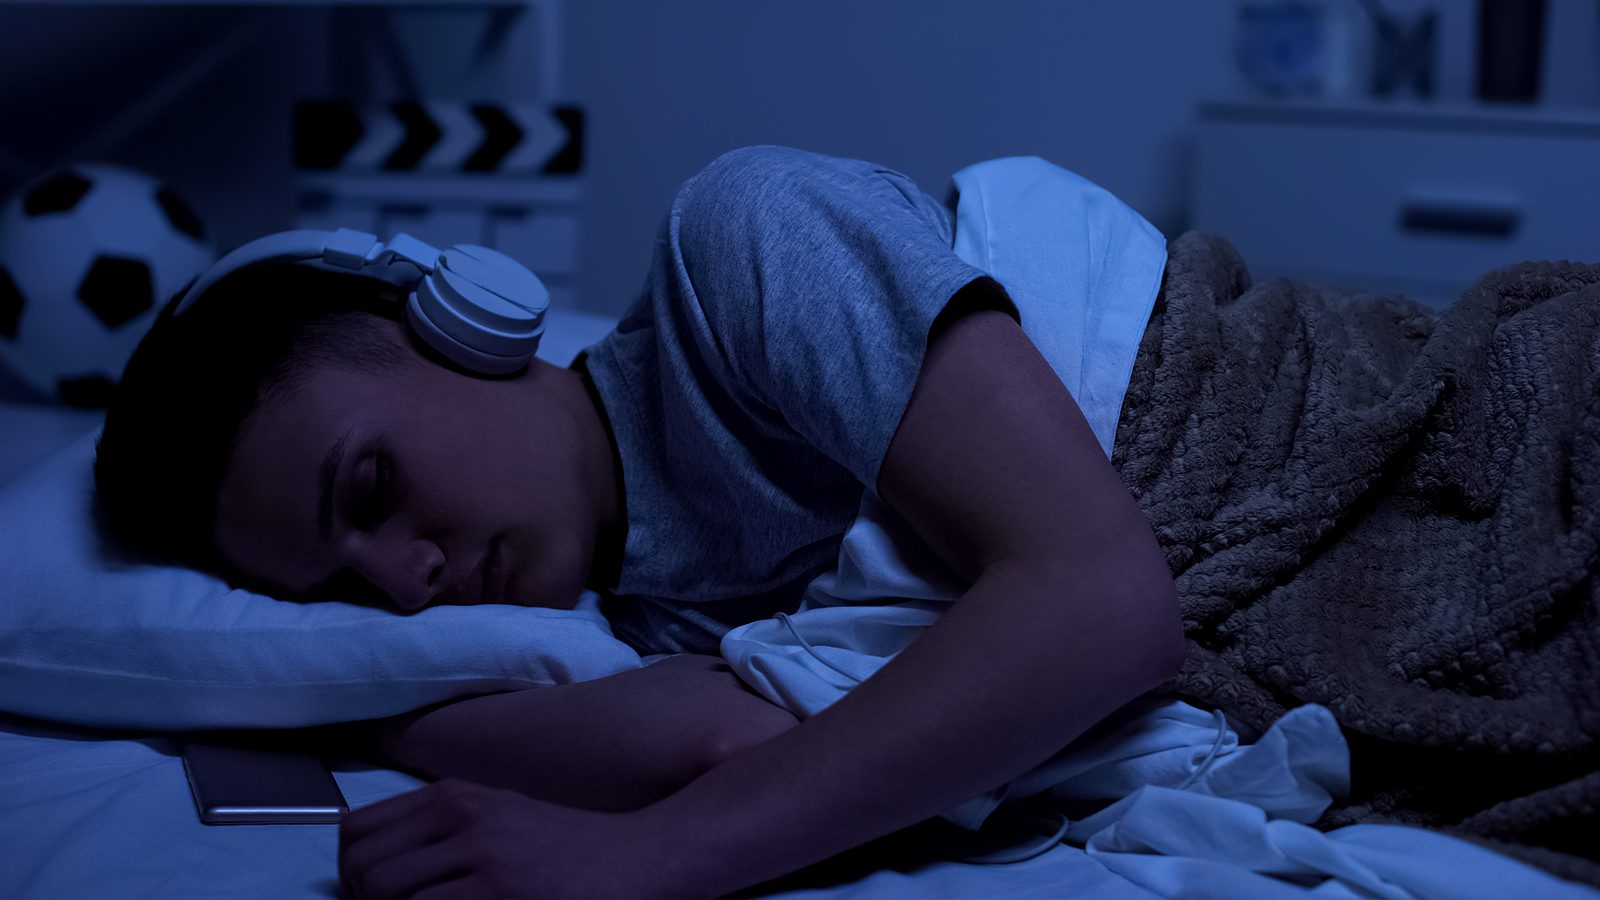 Music May Help You Have Better Sleep, According to Psychologists